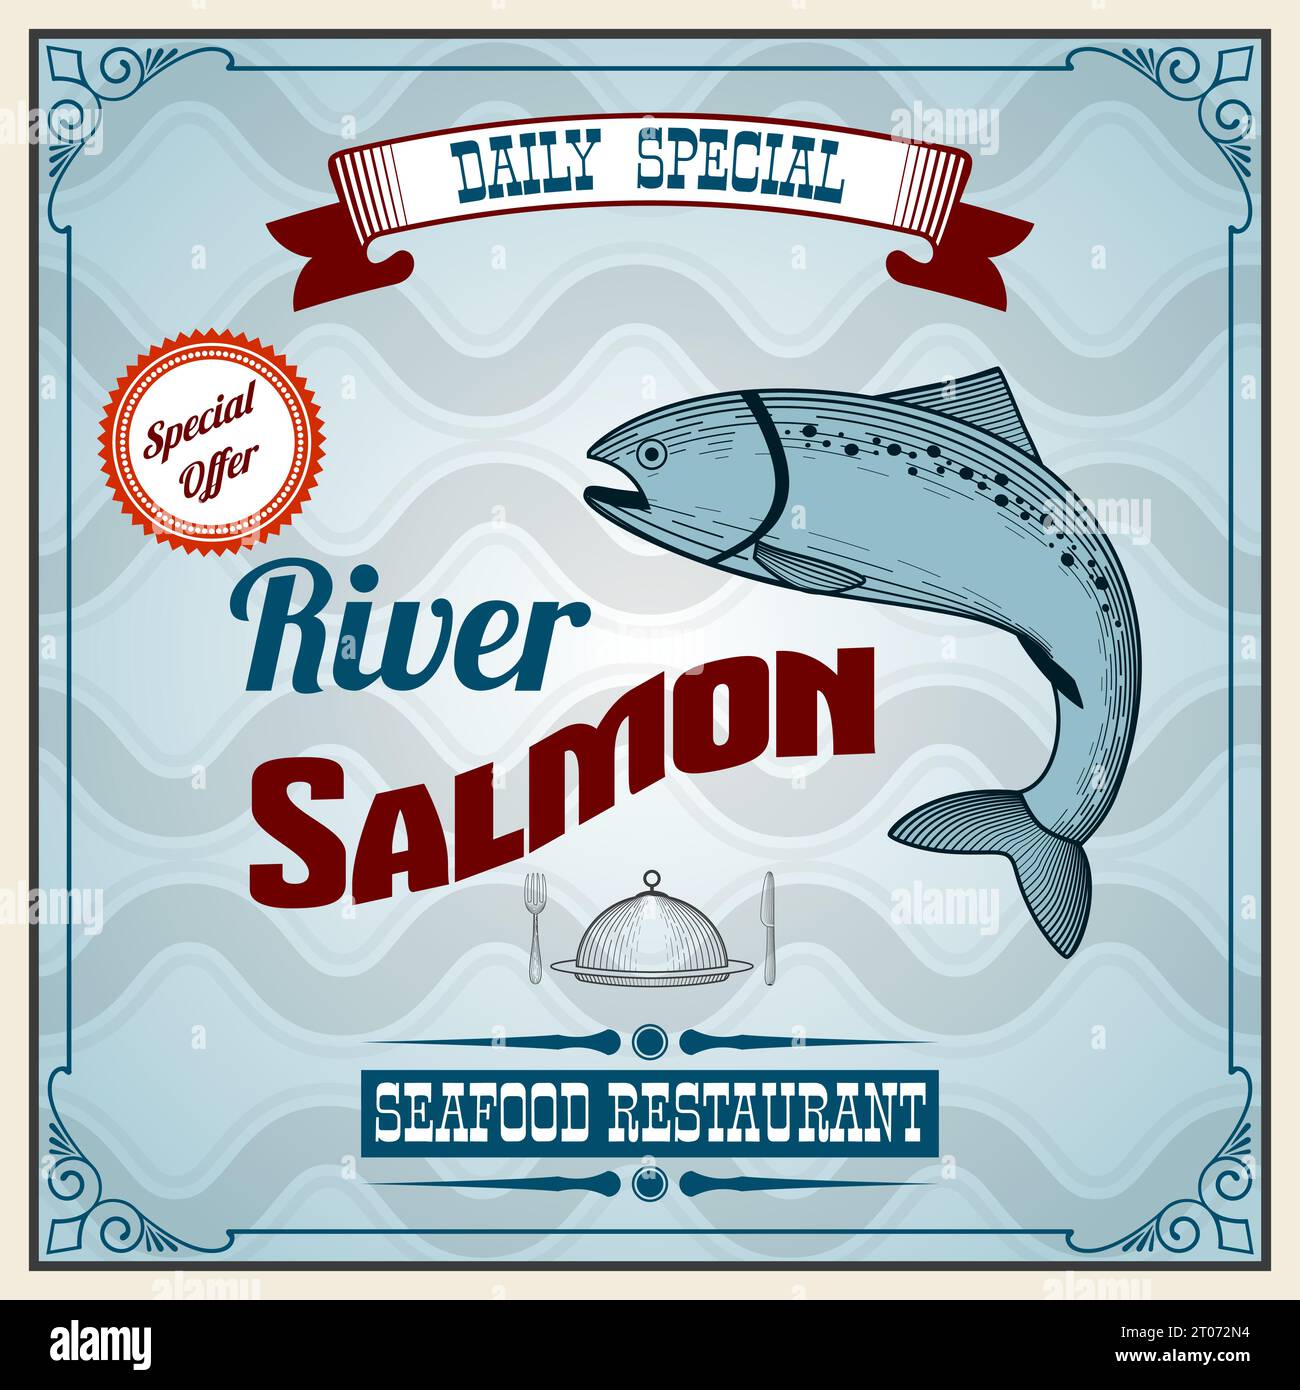 Seafood restaurant retro poster with river salmon fish vector illustration Stock Vector